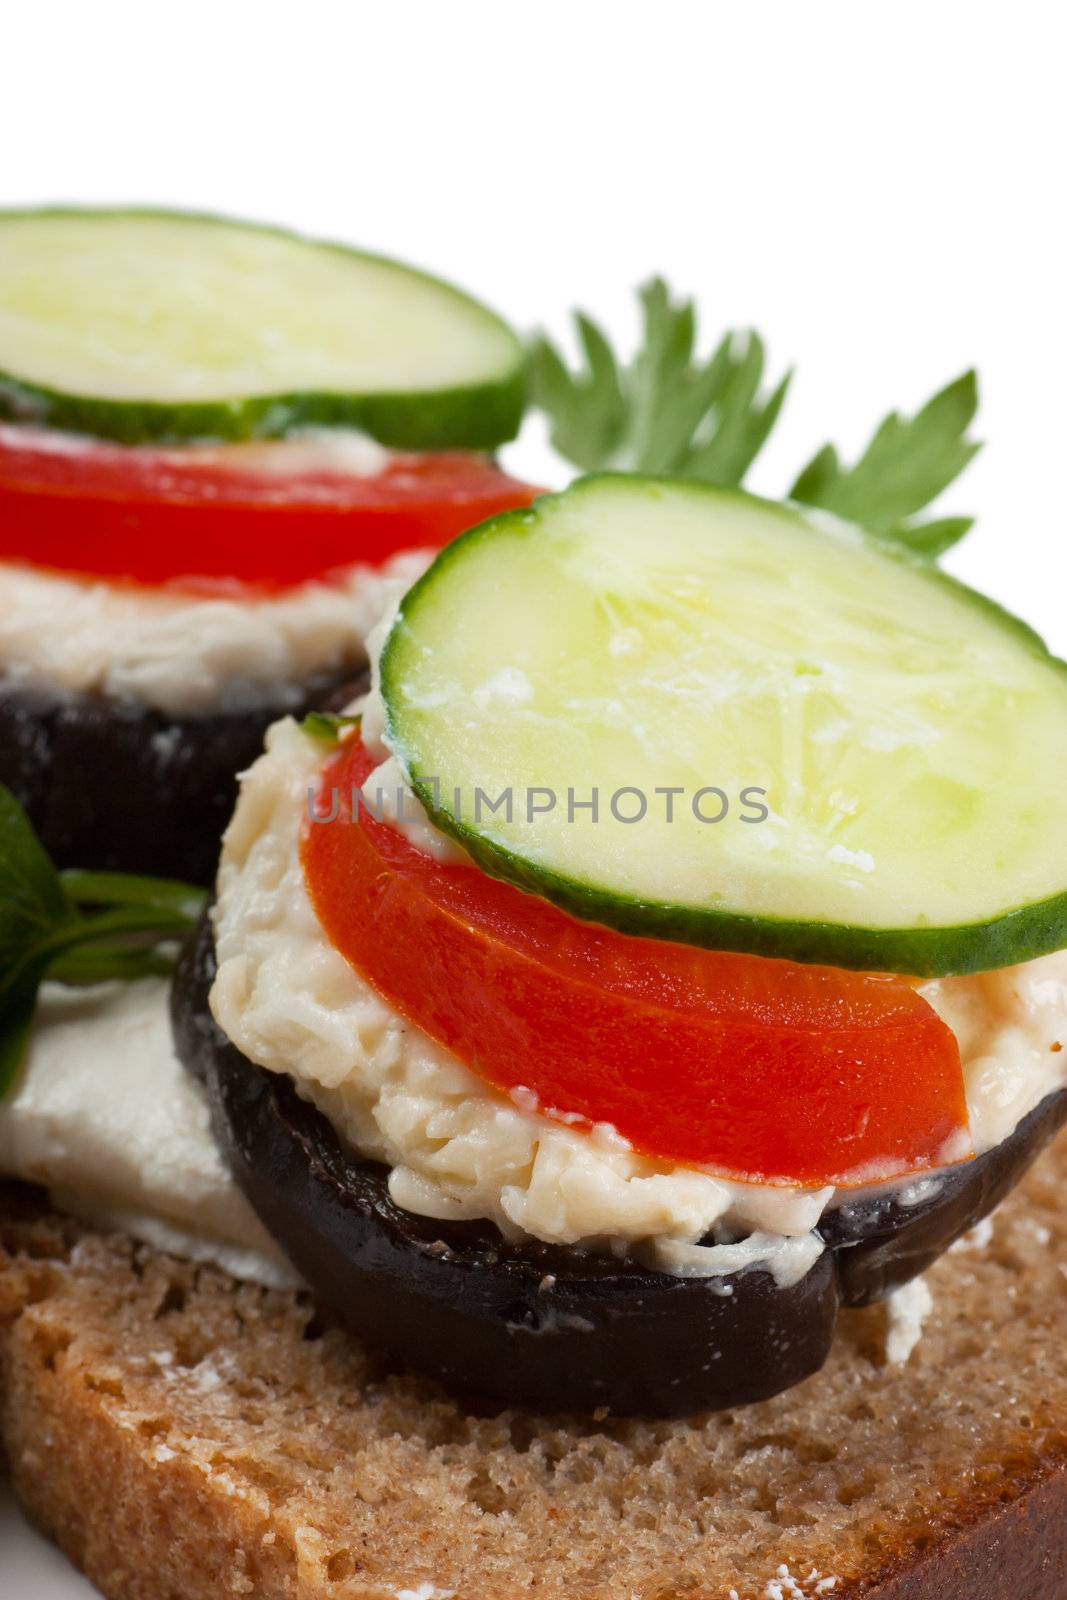 Open sandwich with aubergine and cucumbers over white background